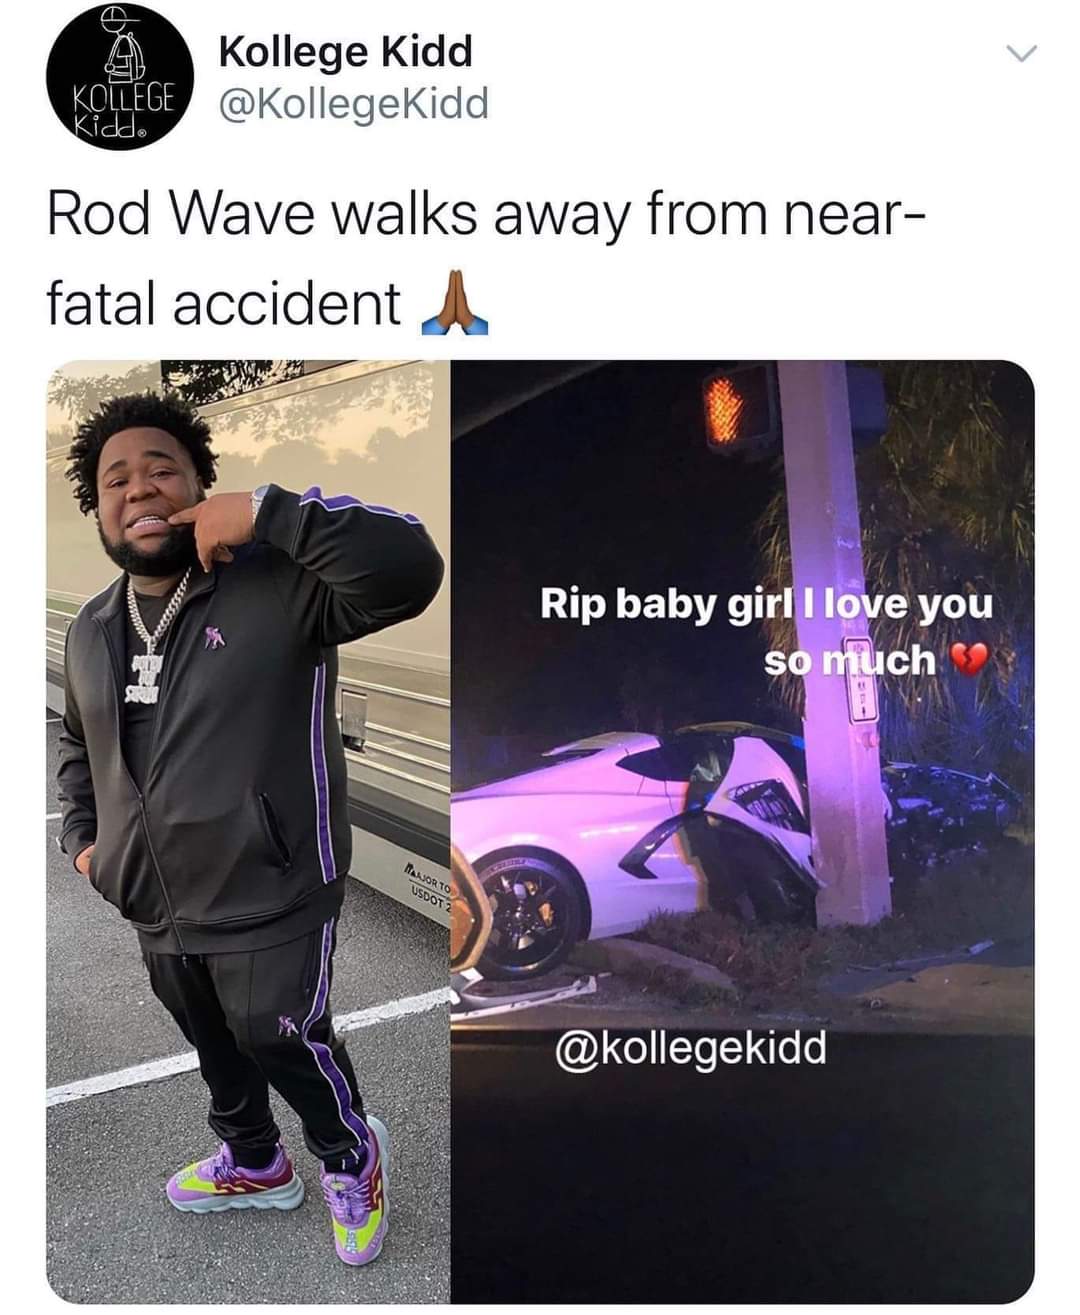 Rod Wave Car Accident: Rapper Involved In Deadly Car Accident